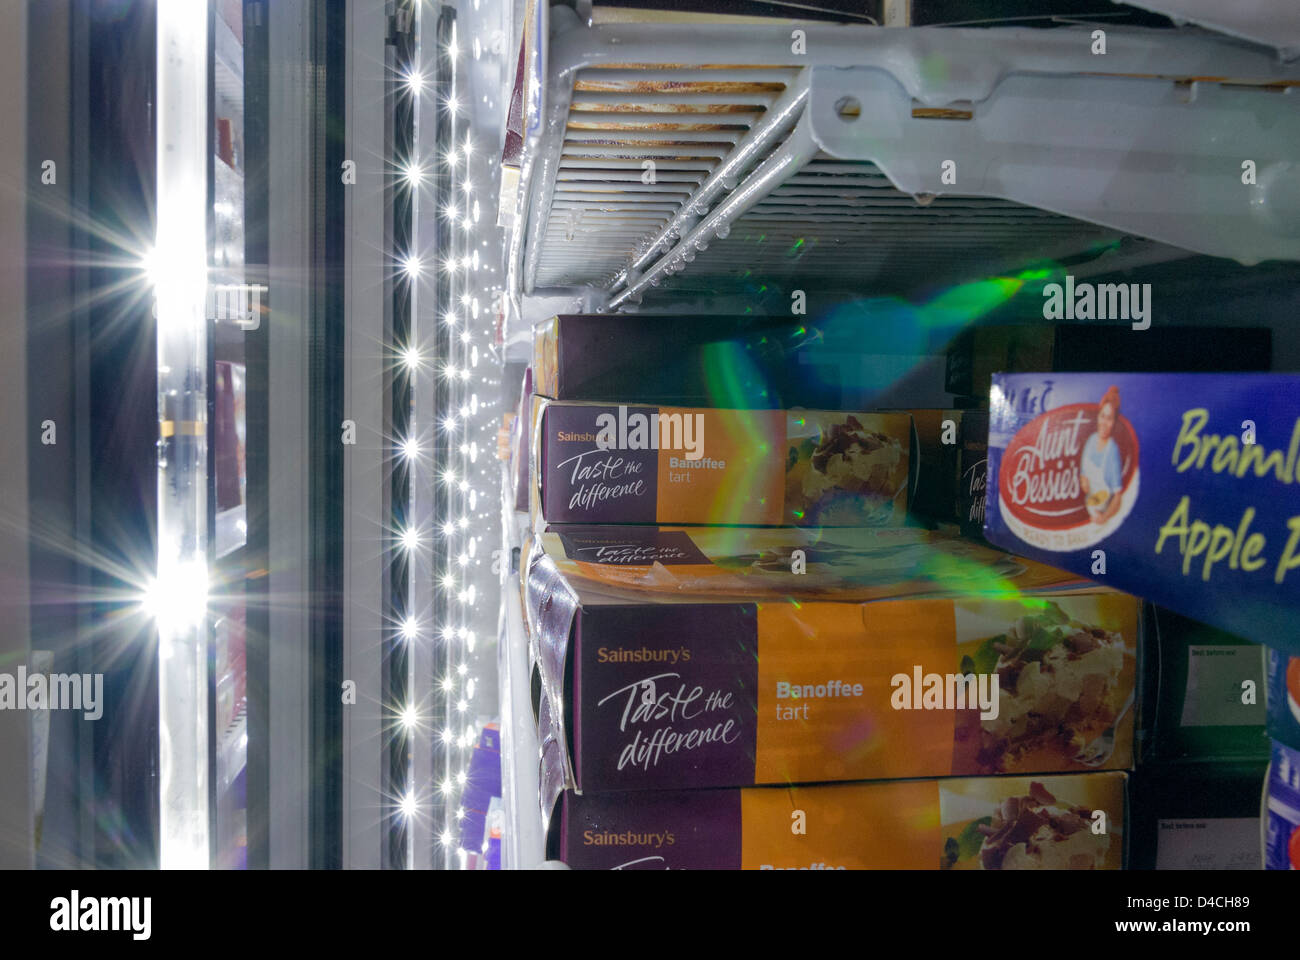 Inside sainsbury supermarket freezer display cabinet with 'taste the difference' product Stock Photo